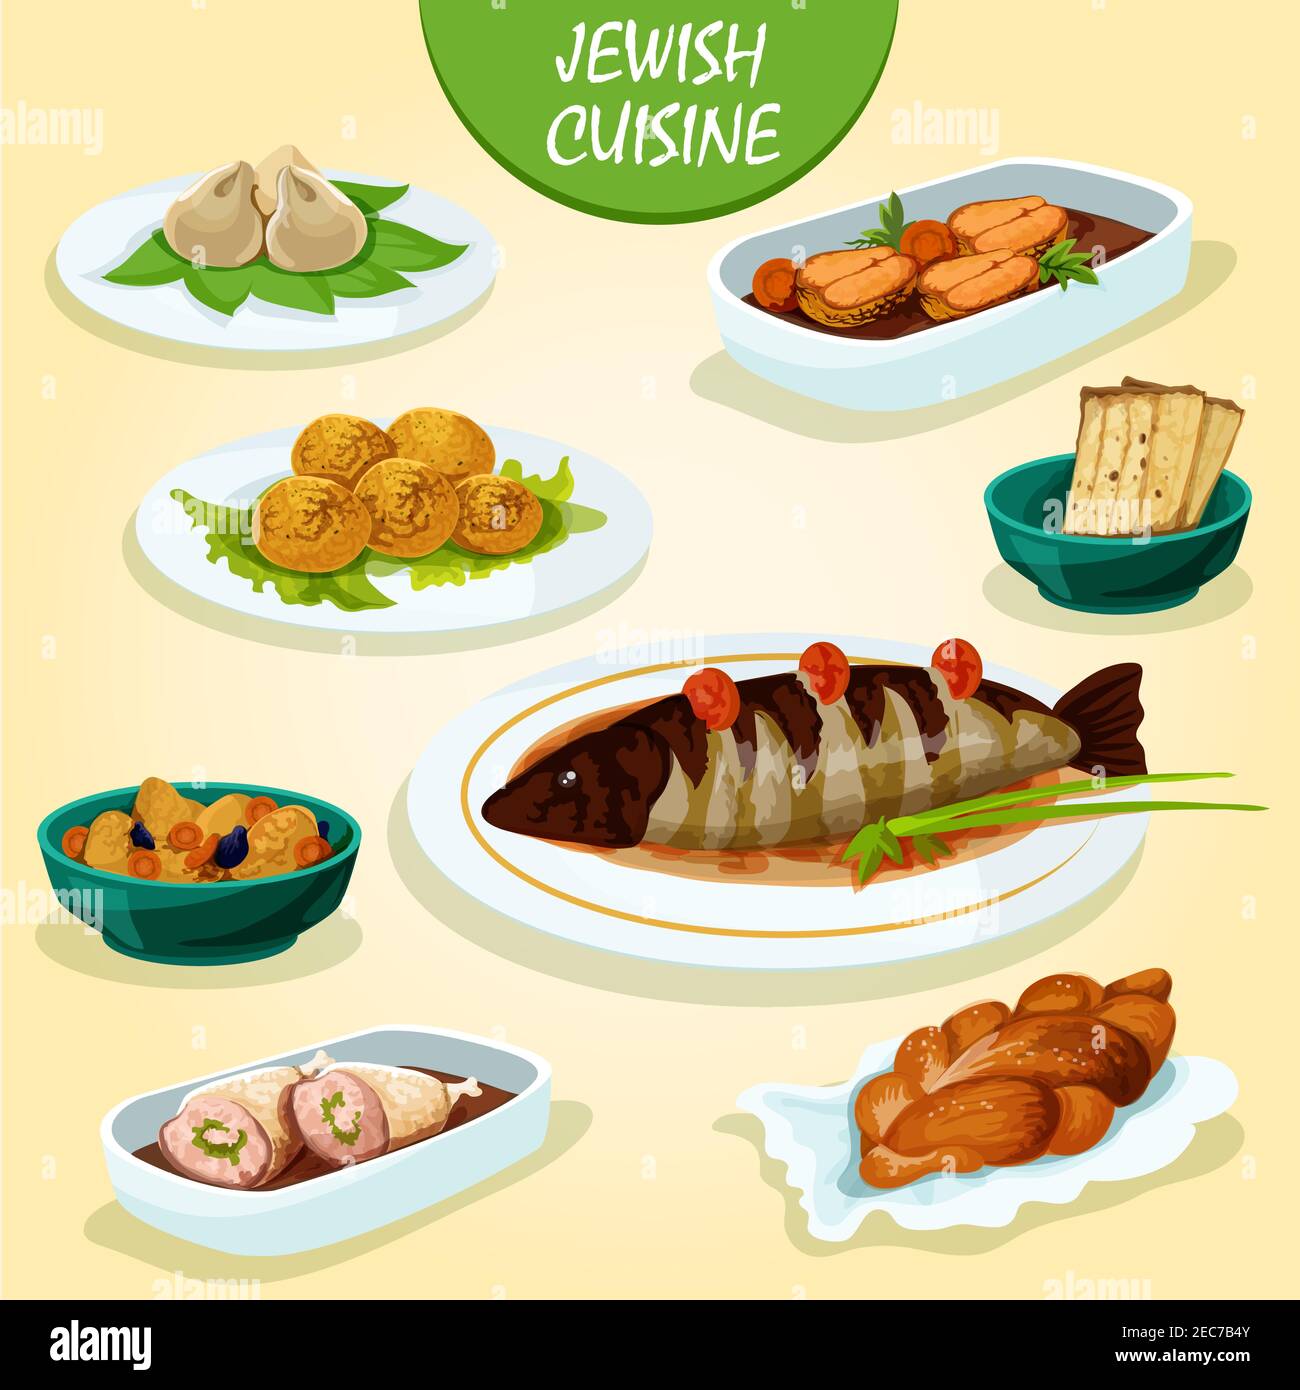 Jewish cuisine icon with matzah, stuffed pike fish and chicken leg, gefilte fish, falafel, meat dumplings kreplach, lamb stew with lentil and dried fr Stock Vector